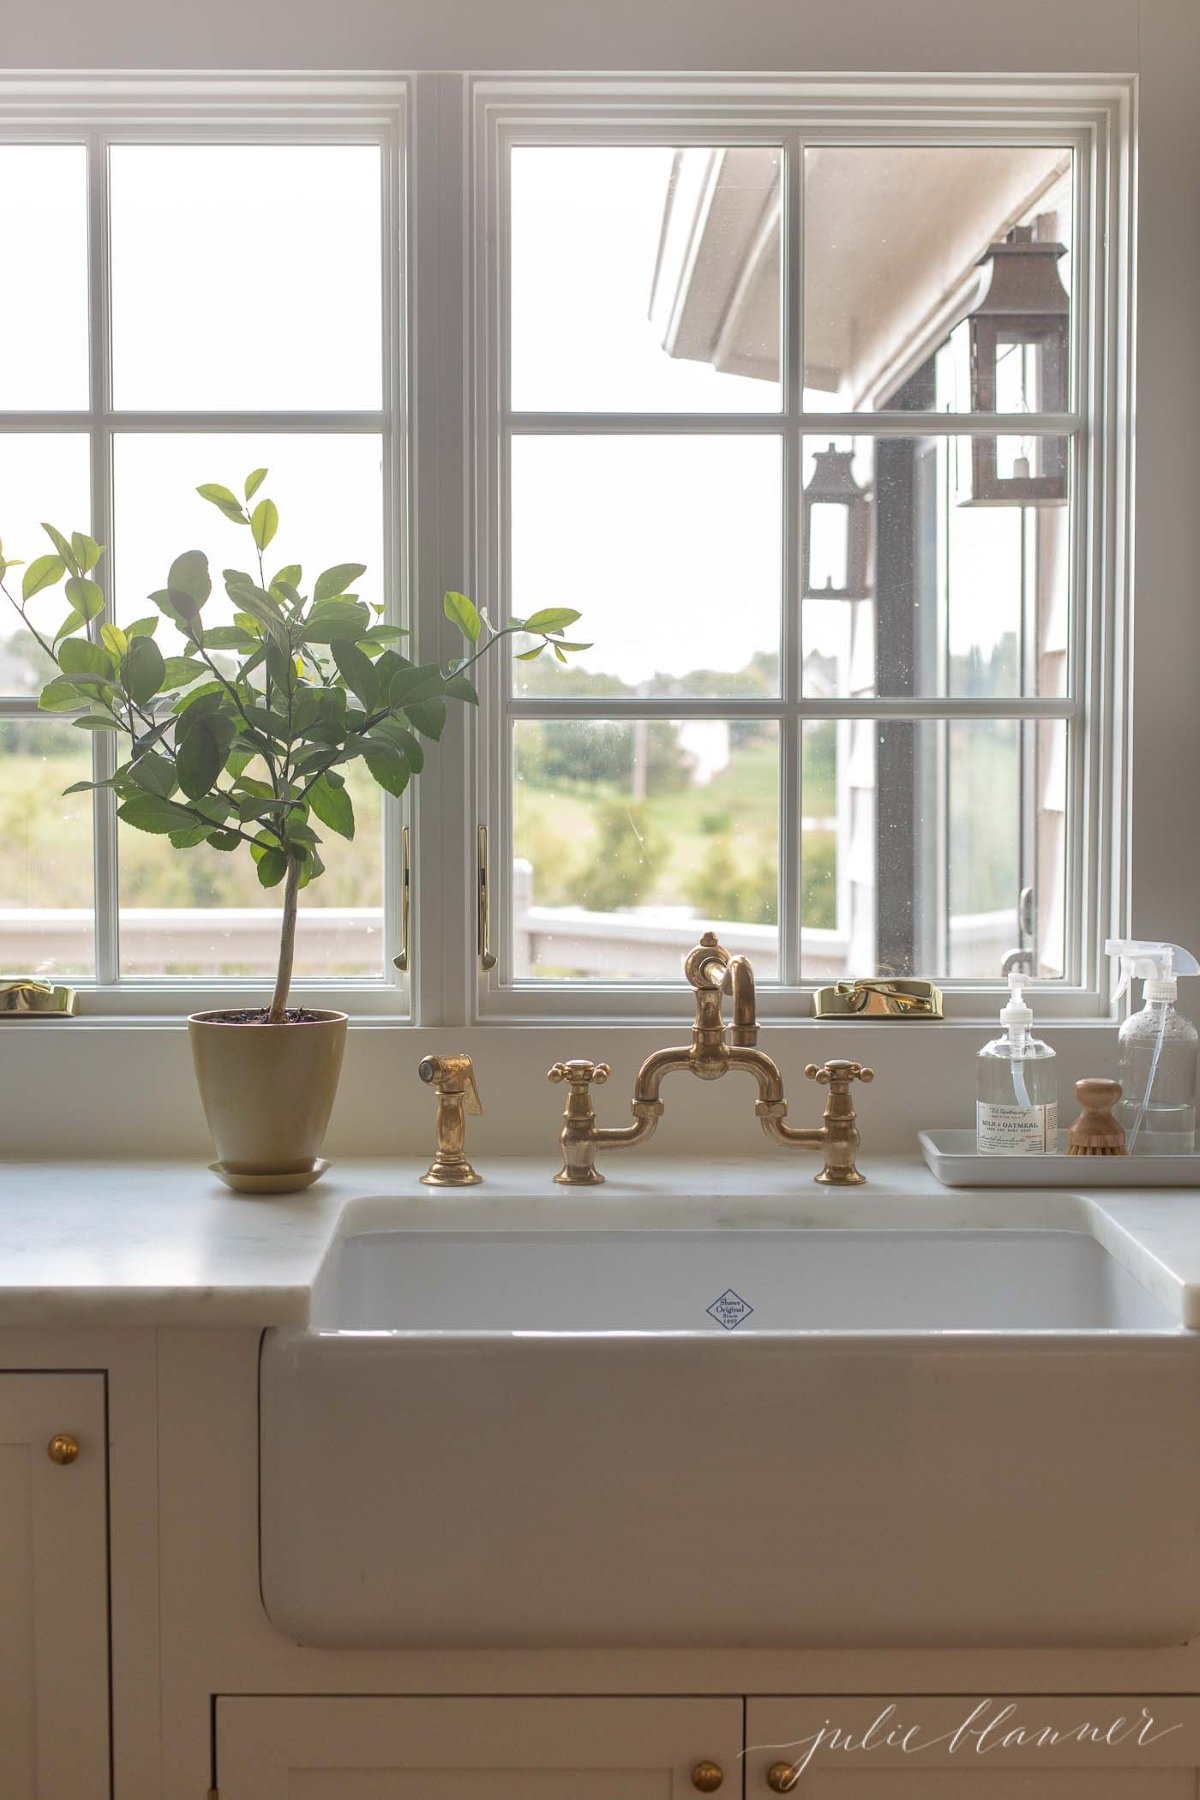 A meyer lemon tree in a pot by a kitchen sink with a brass faucet.